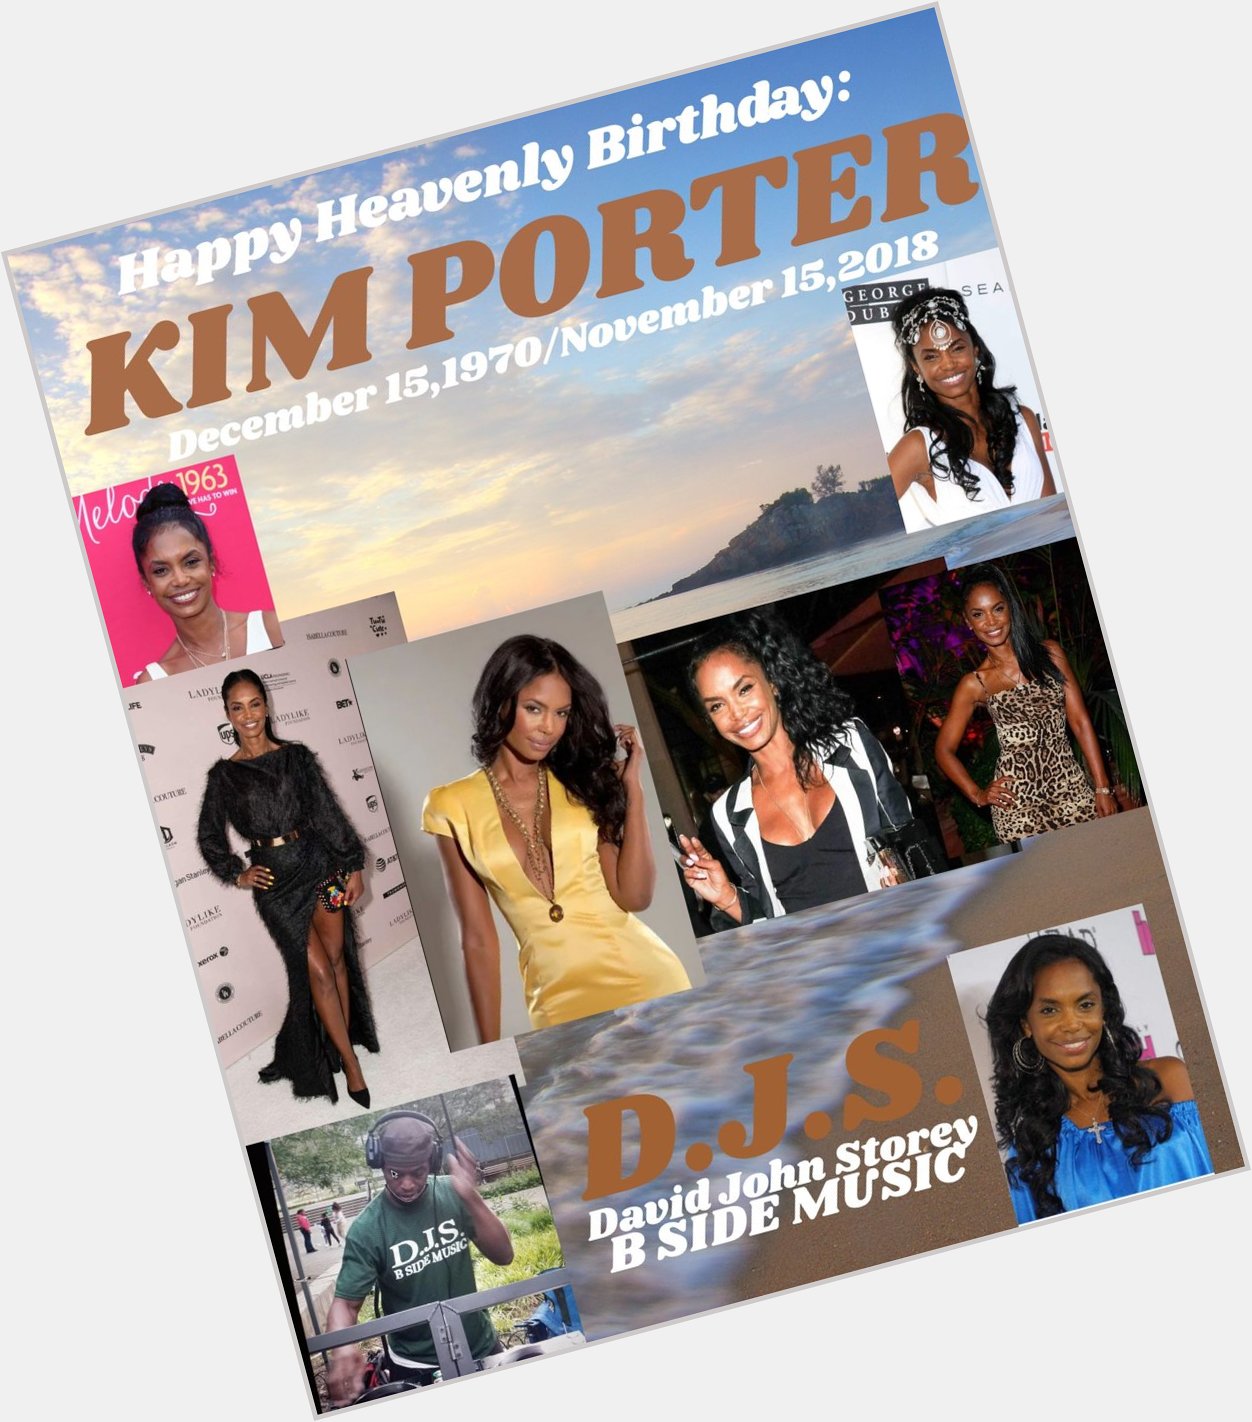 I(D.J.S.)\"B SIDE\" taking time to say Happy Heavenly Birthday to \"KIM PORTER\". 